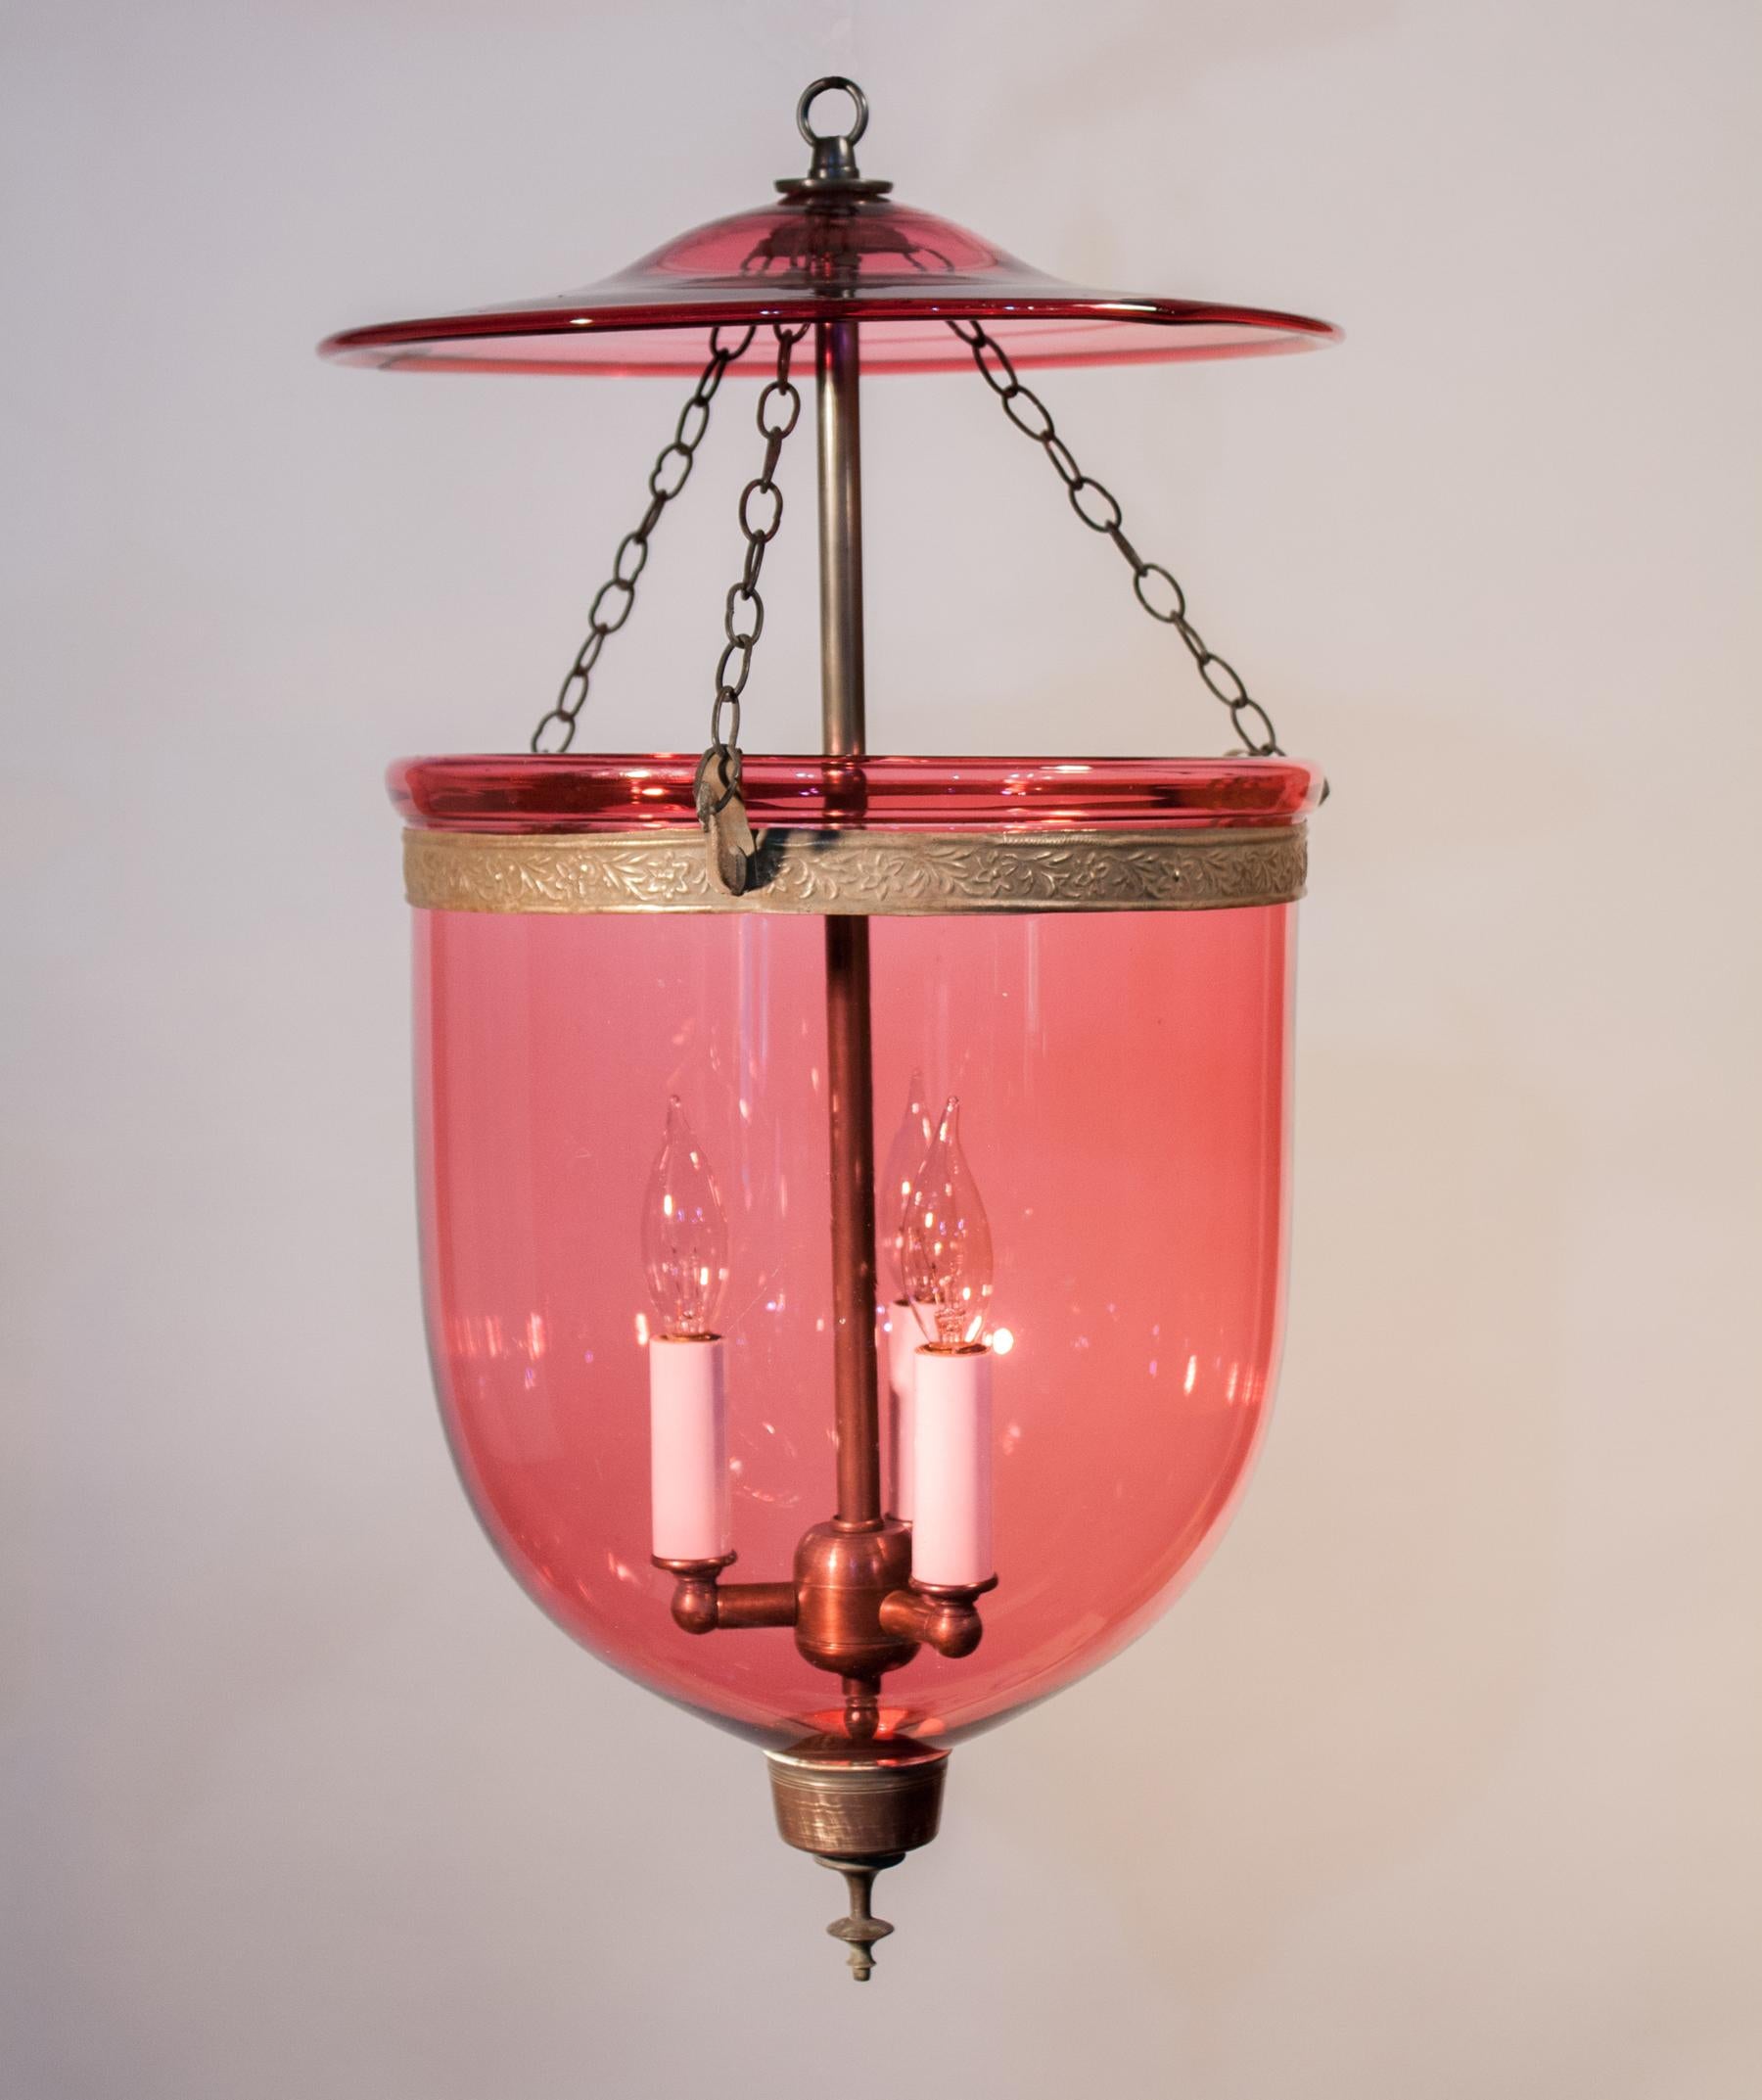 An exceptional cranberry-colored hand blown glass bell jar lantern from England. Adorned with its original brass band and finial base, this pendant light casts a warm, beautiful light. The light fixture has been newly electrified with a three-bulb